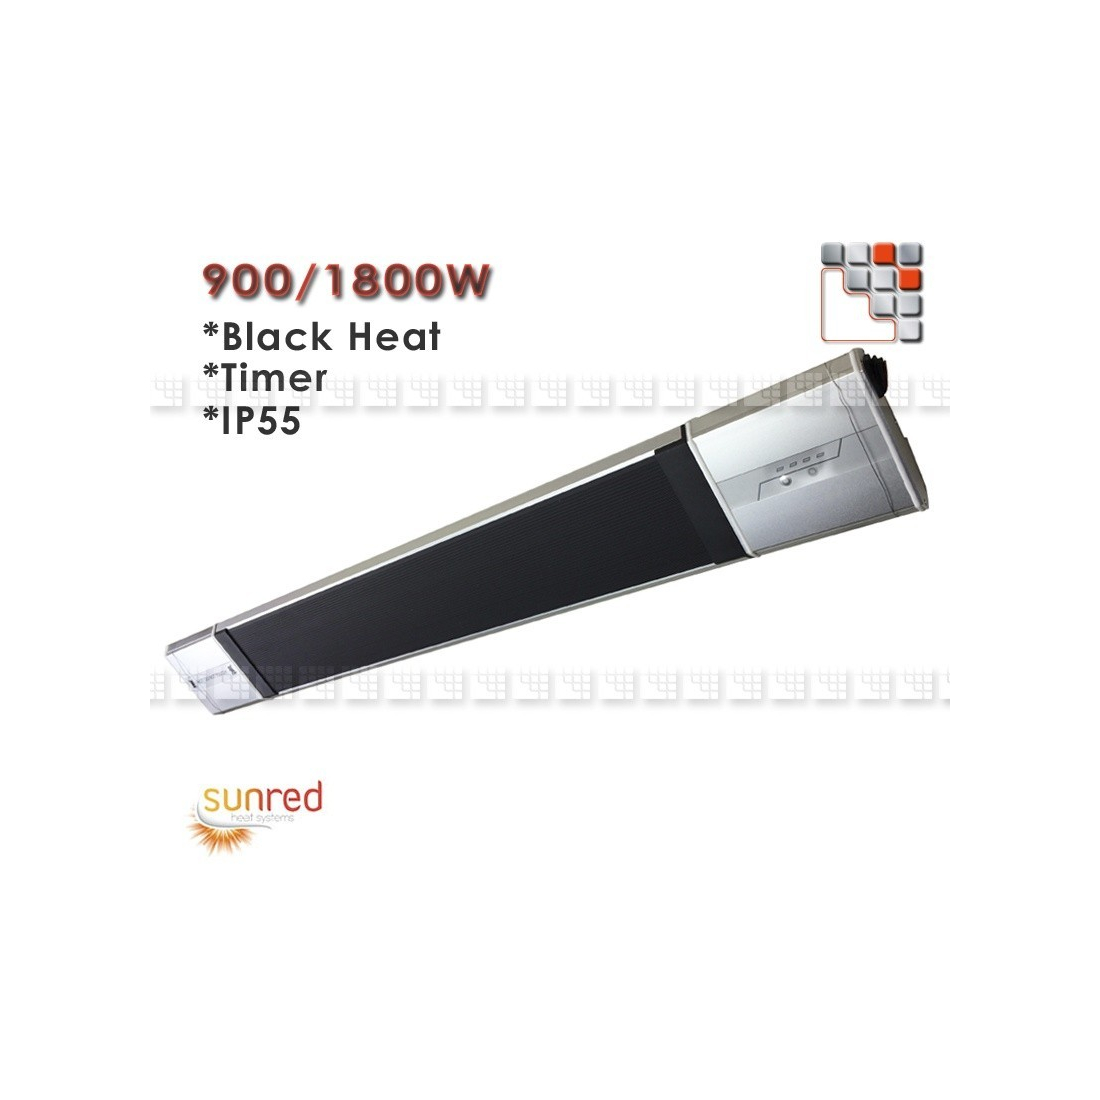 Heating Black Heat 1800W Infrared O53-HS15 OutTrade Outdoor Patio Heater